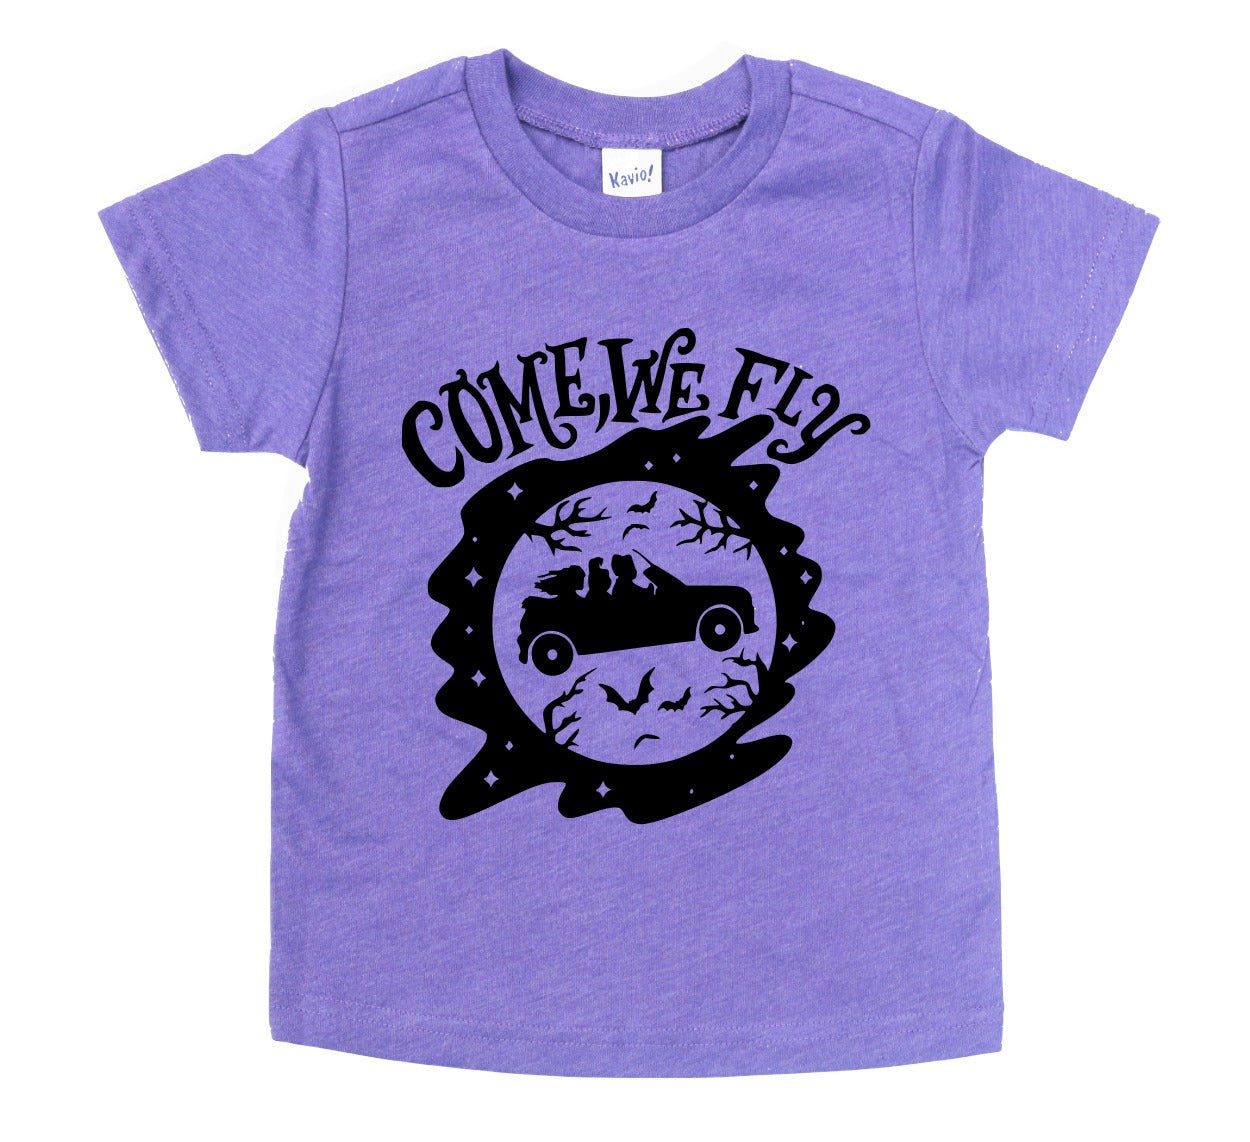 COME WE FLY KIDS SHIRT